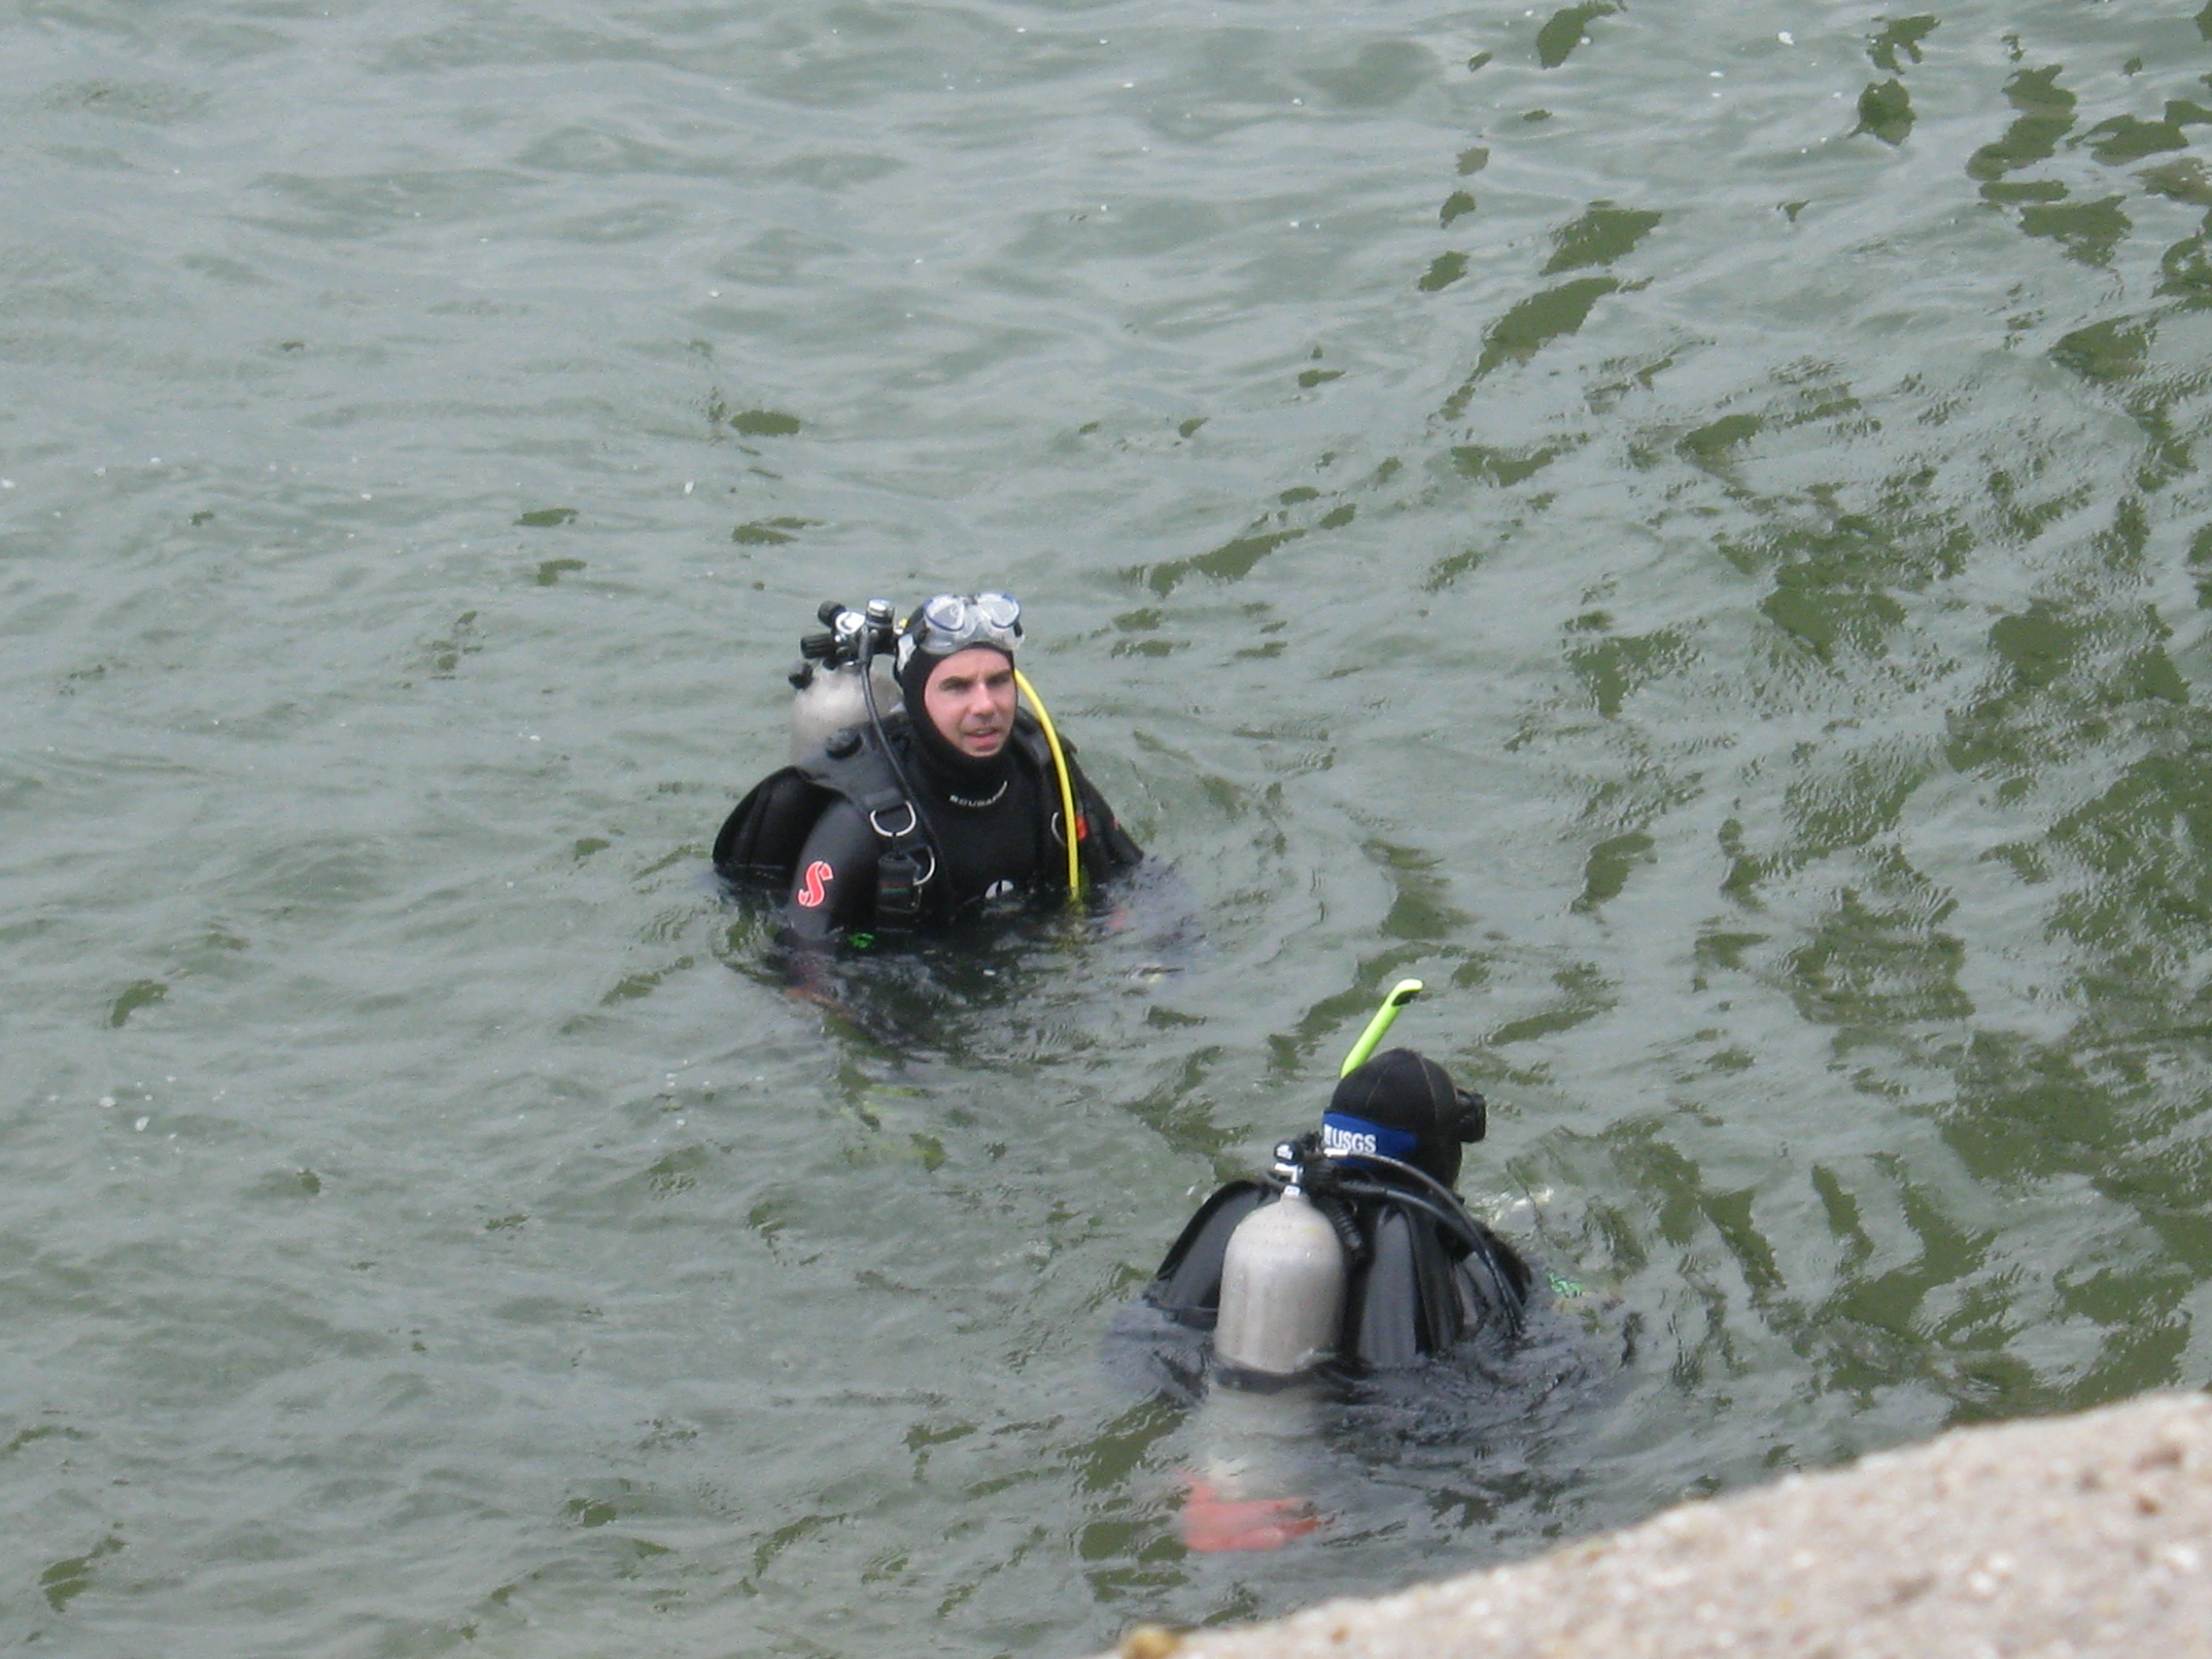 Two scuba divers, head and shoulders above the water, with the lake shore visible in the bottom corner of the image